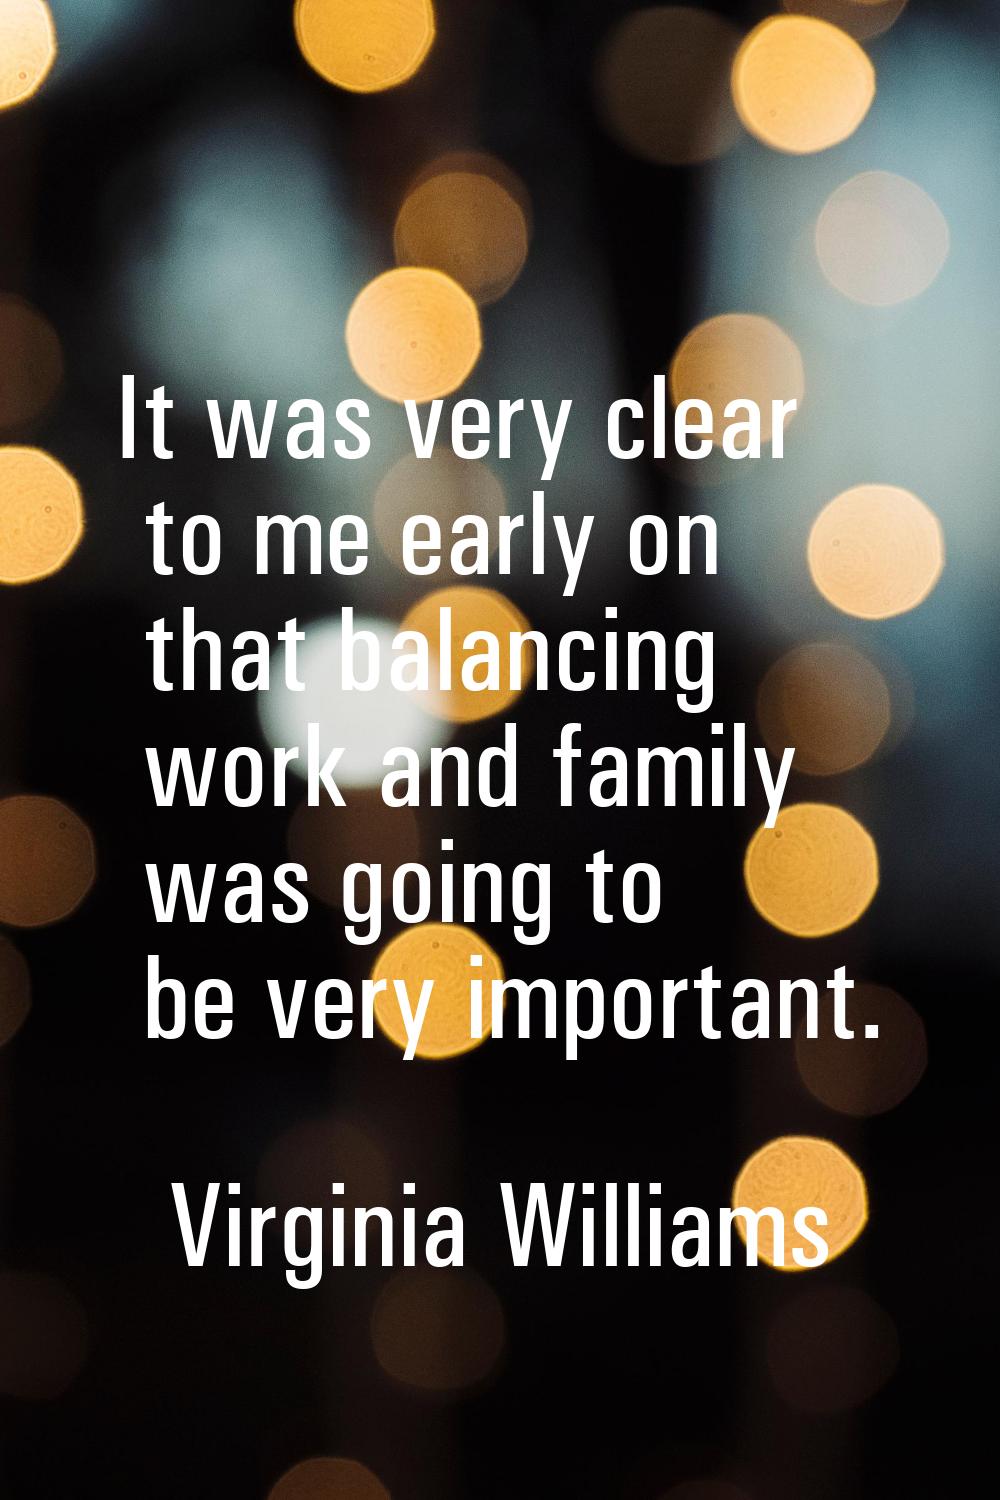 It was very clear to me early on that balancing work and family was going to be very important.